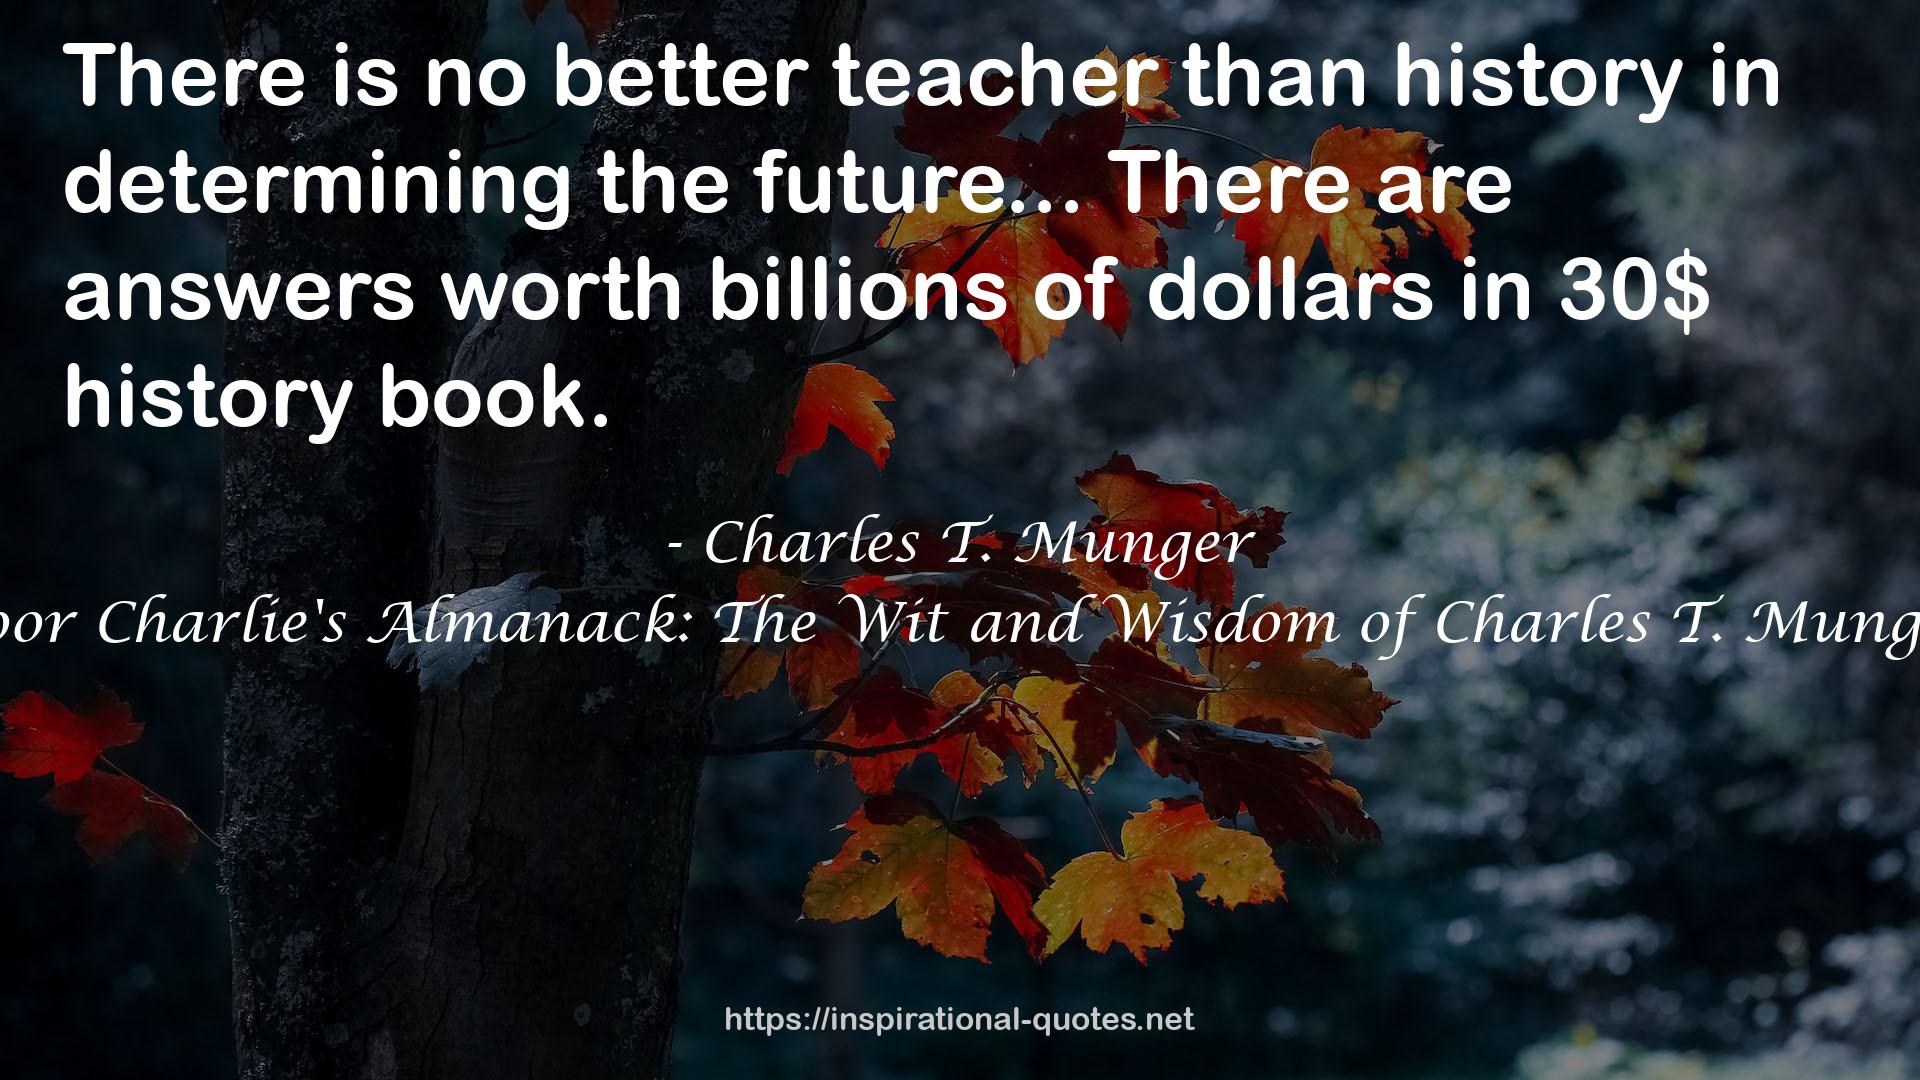 Poor Charlie's Almanack: The Wit and Wisdom of Charles T. Munger QUOTES